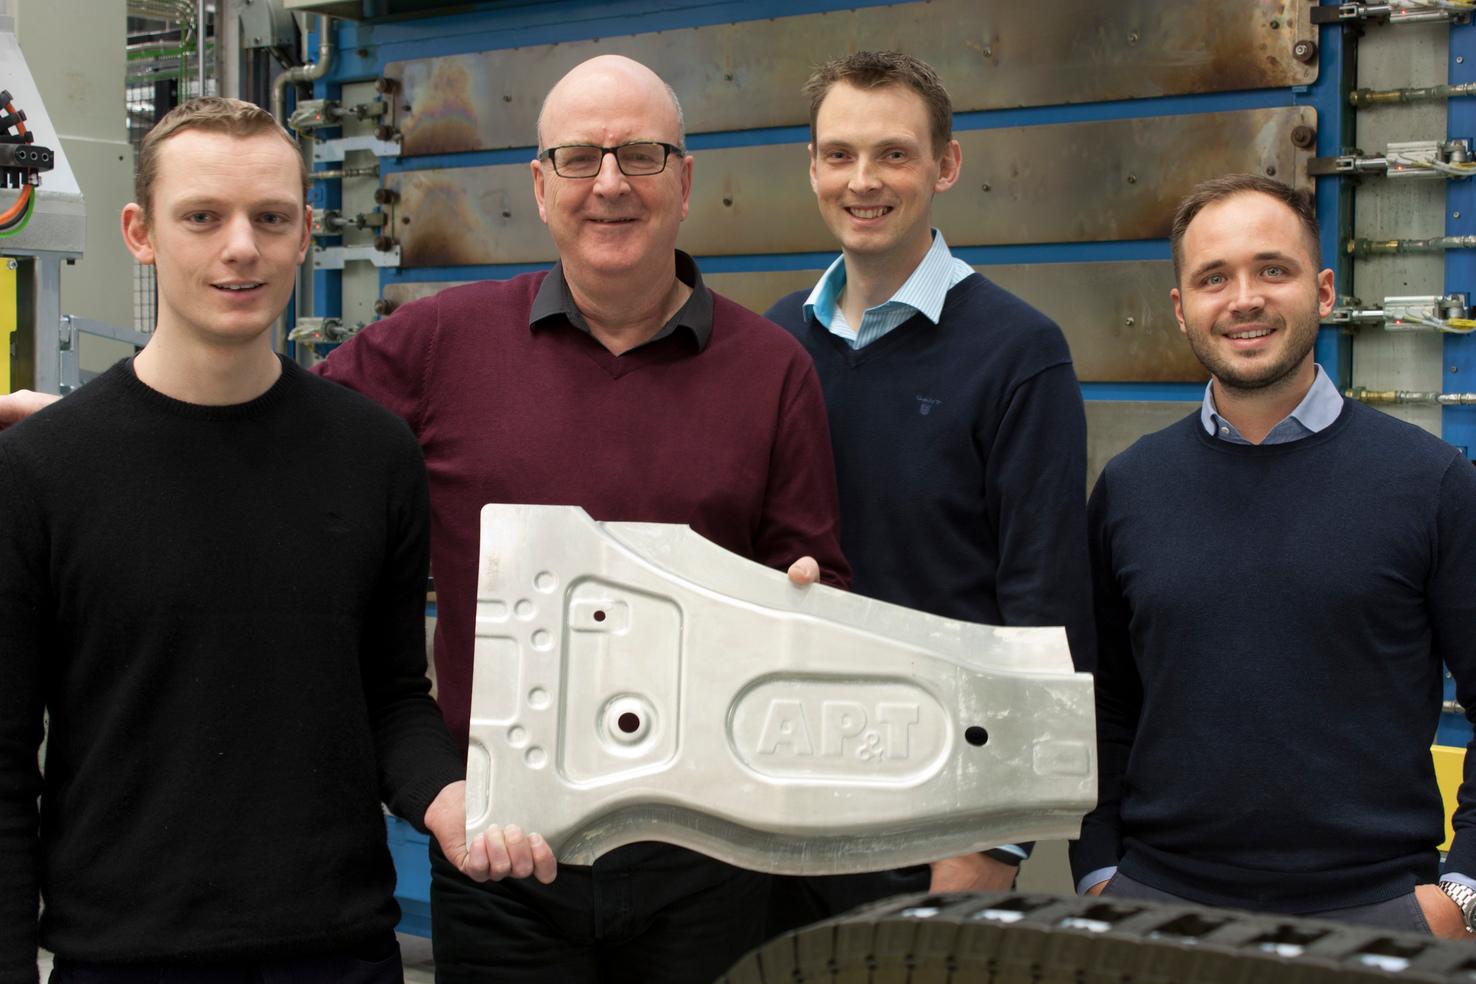 AP&T’s R&D team is helping to develop a new forming method for aluminum that can make the cars of tomorrow lighter and more fuel efficient. From left: Otto Kragt (devel-opment engineer, R&D), Lars-Olof Jönsson (project manager, R&D), Knut Erik Snilsberg (MSc Metallurgy, SINTEF) and Dr. Christian Koroschetz (director, Technology Development).